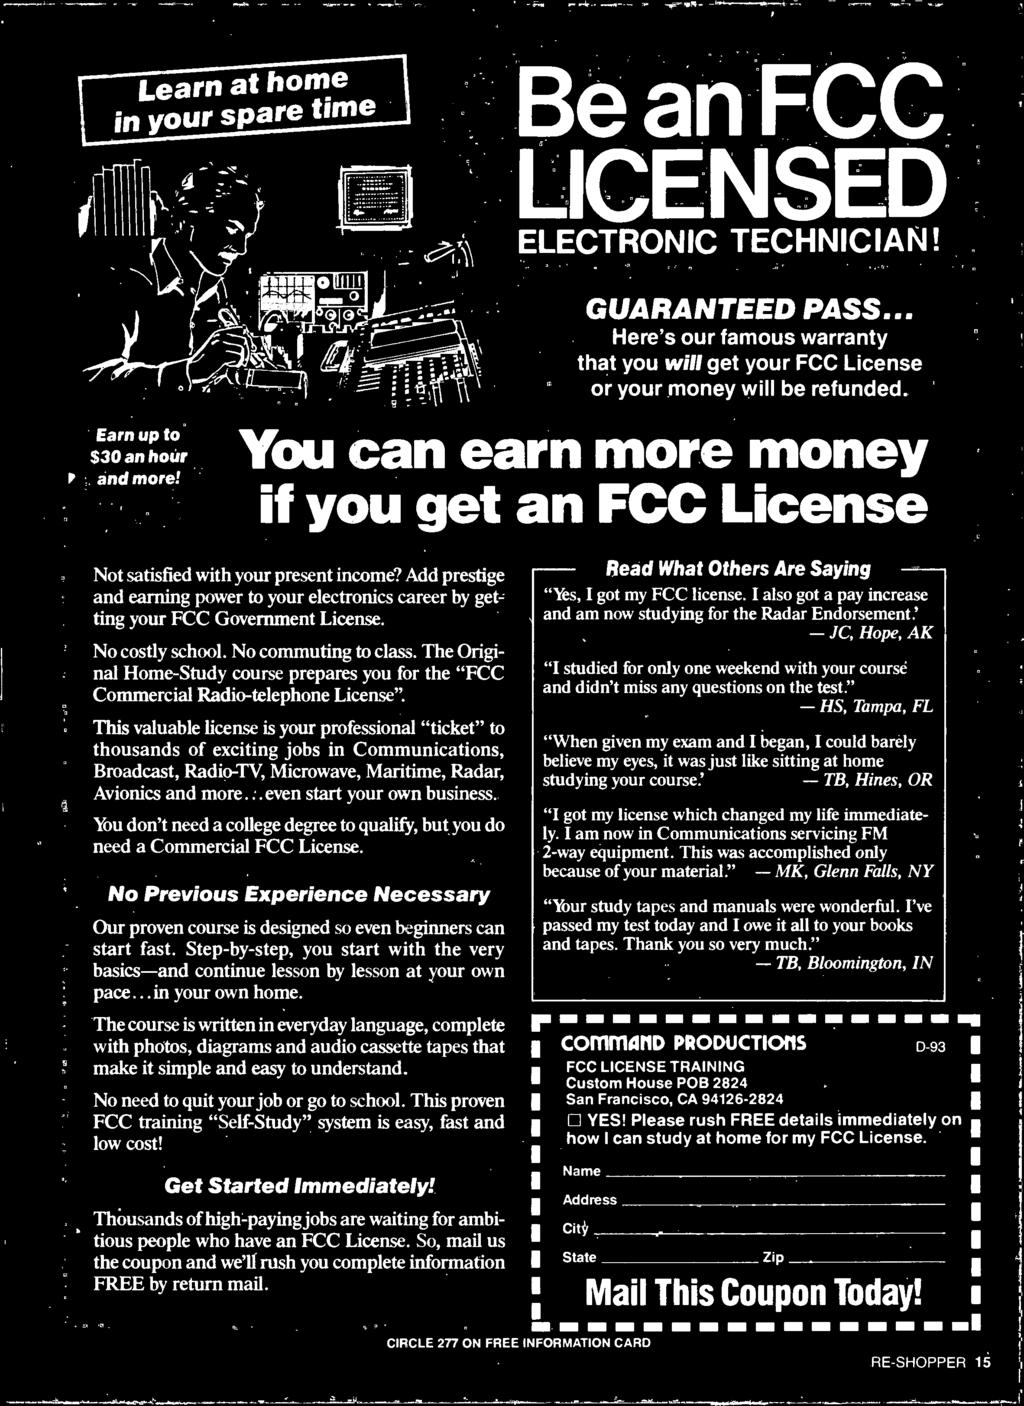 You don't need a college degree to qualify, but you do need a Commercial FCC License. No Previous Experience Necessary Our proven course is designed so even beginners can start fast.